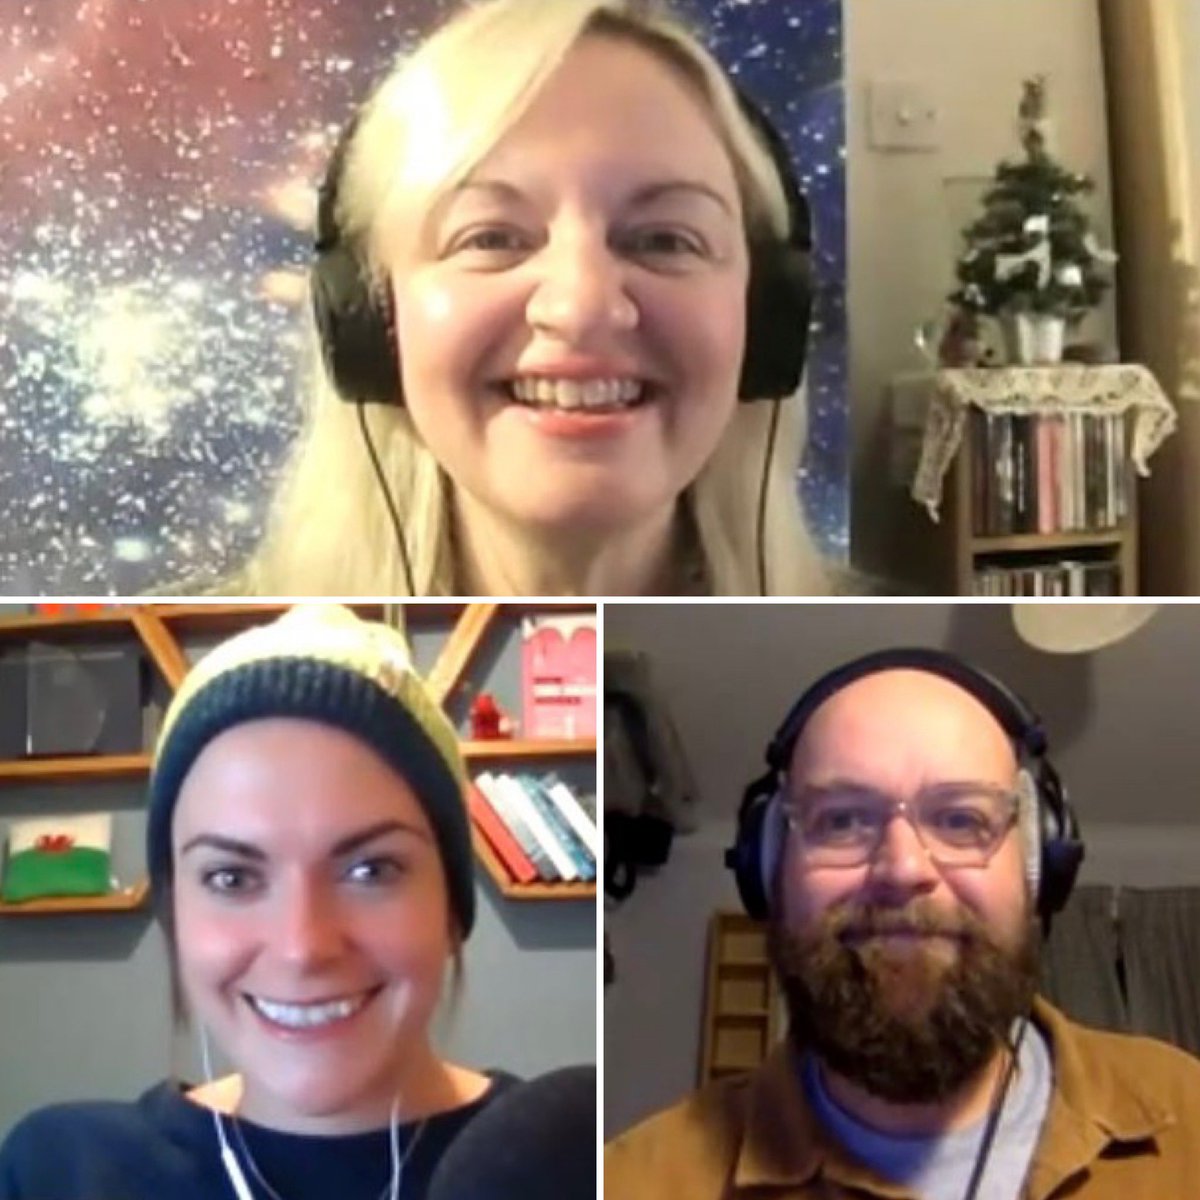 🎧 Ep114 Xmas Special of Jo Durrant’s Beautiful Universe podcast is out now with a trio of guests: 🦊❄️ @mrjamesmayhew & @zebsoanes 🌲🎄 @EllenMaryGarden & Faith Douglas @ThorpPerrow 🧠🎶 @EmmaYhnell & @findlaynapier 📲 podcasts.apple.com/gb/podcast/jo-… 💻 jodurrantsbeautifuluniverse.libsyn.com